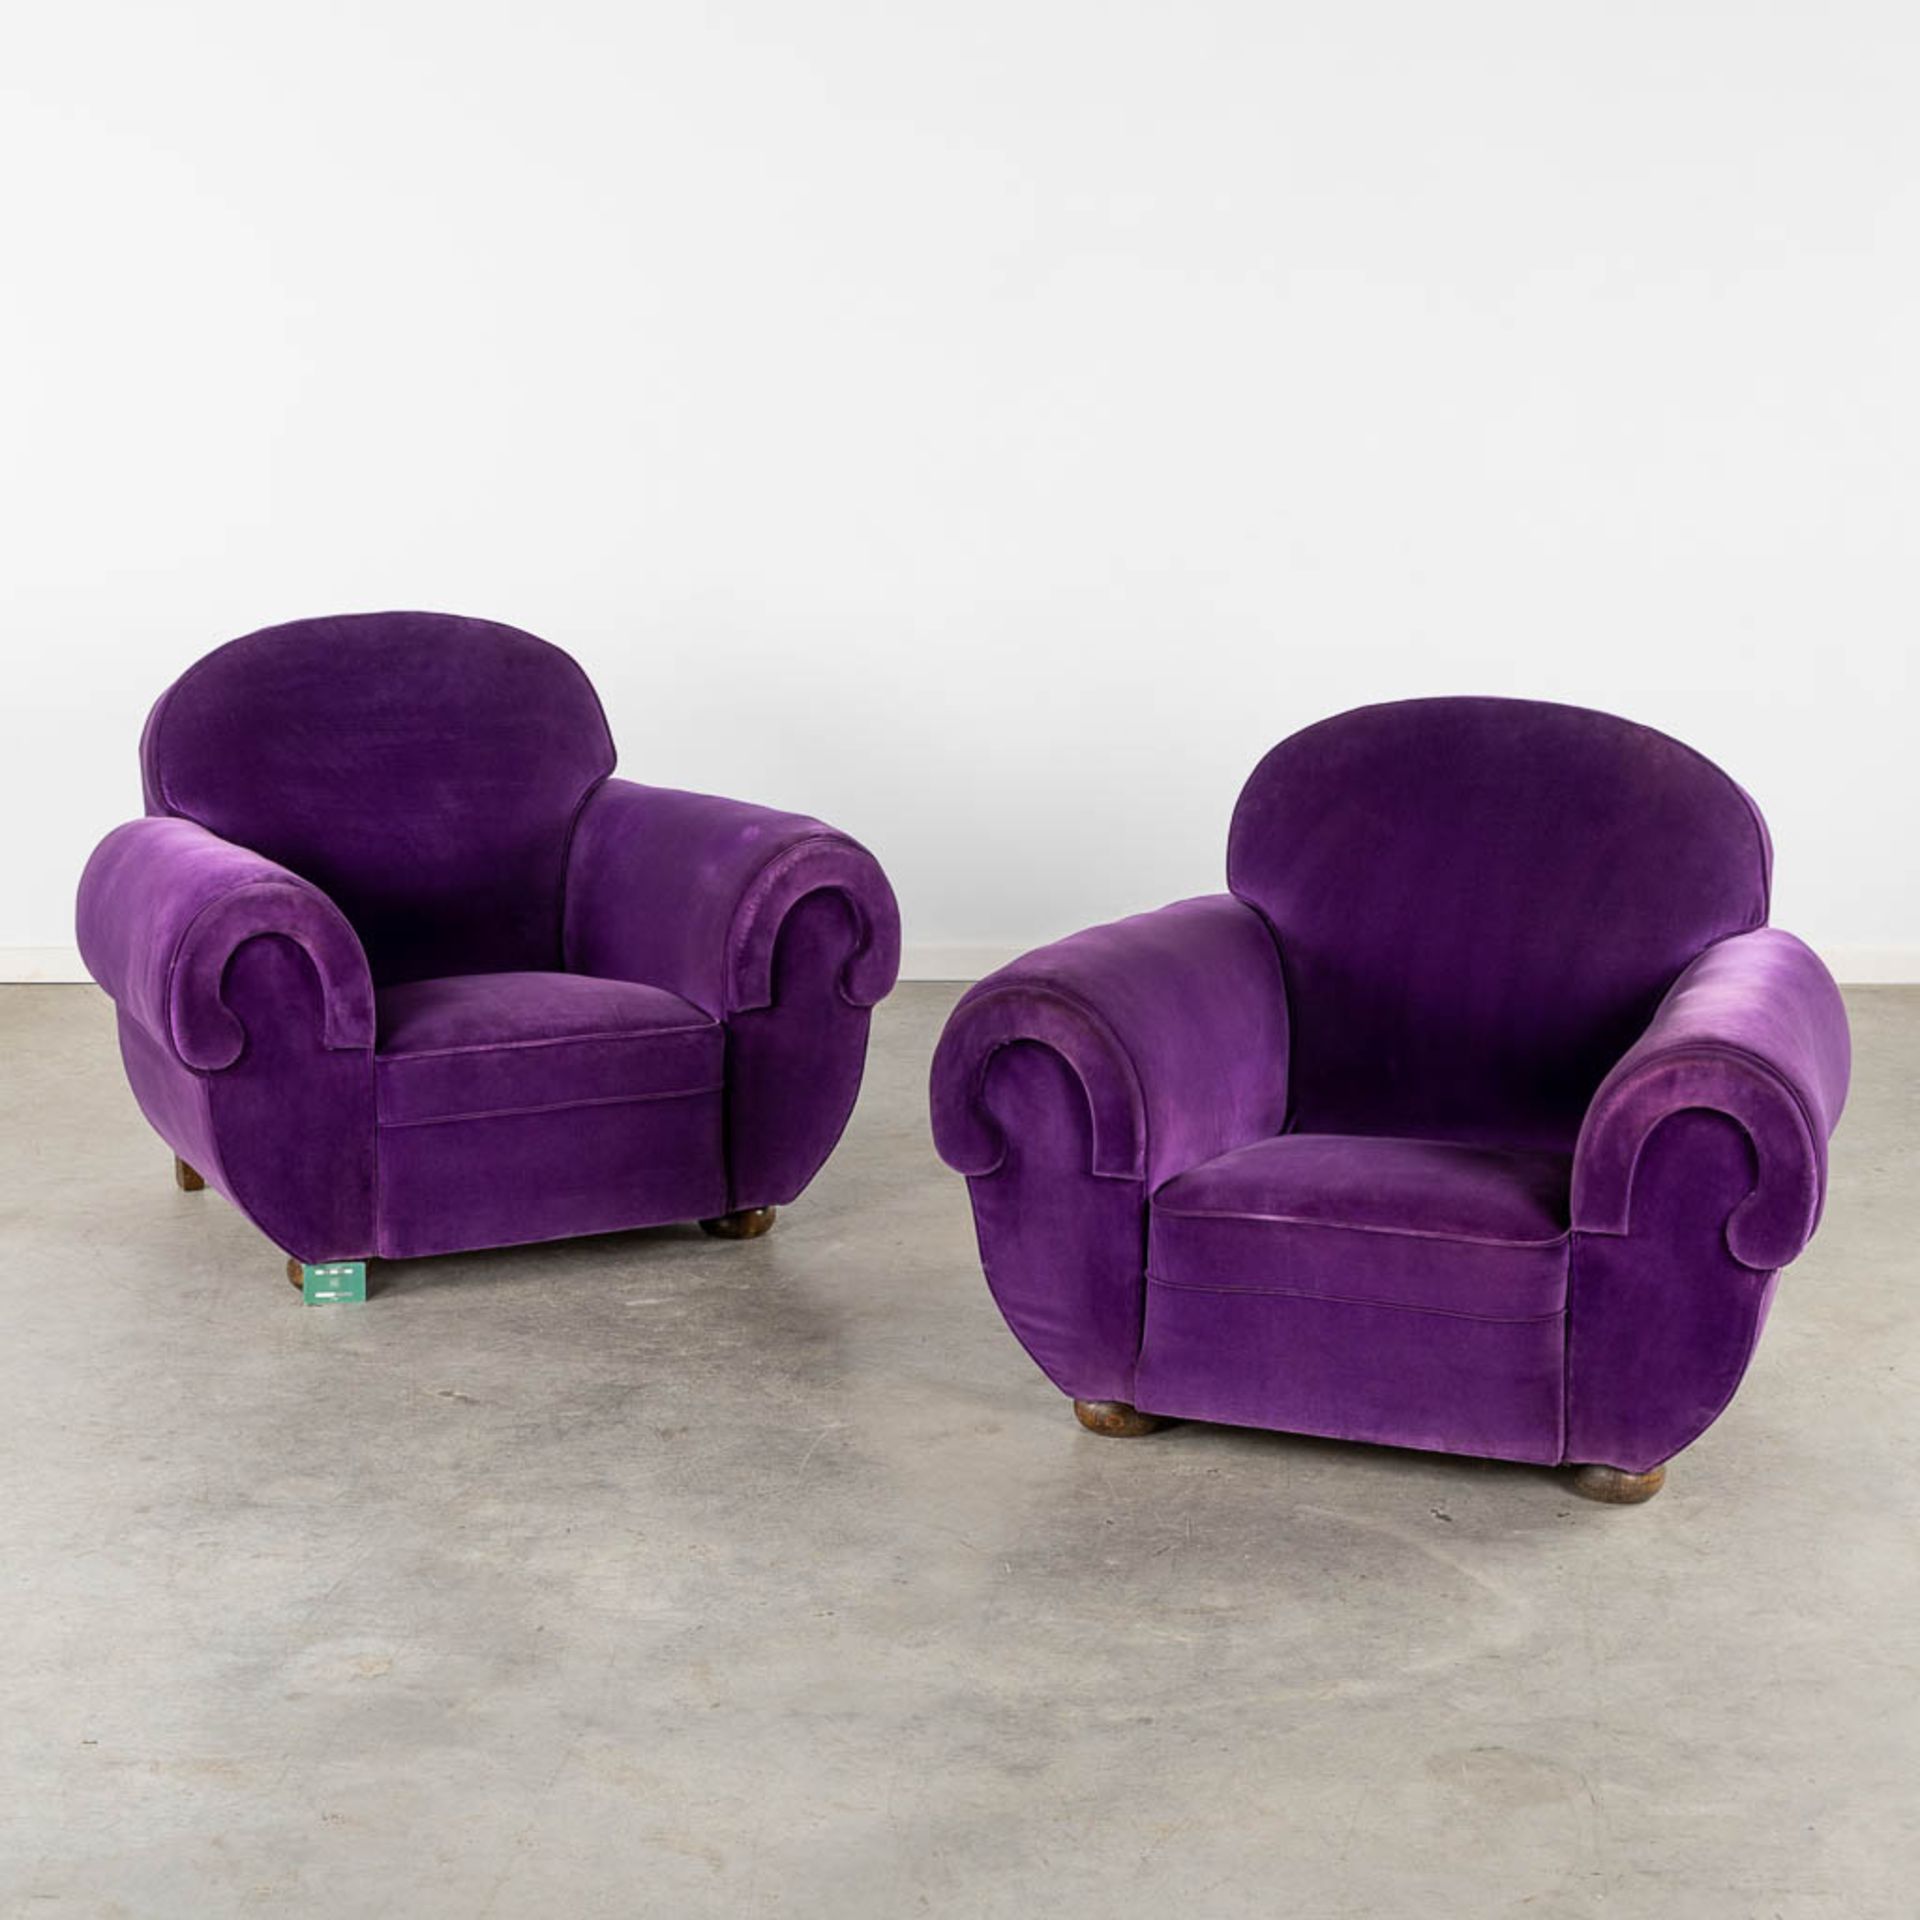 A pair of armchairs with purple fabric upholstry, France, Art Deco. (L:84 x W:109 x H:87 cm) - Image 2 of 10